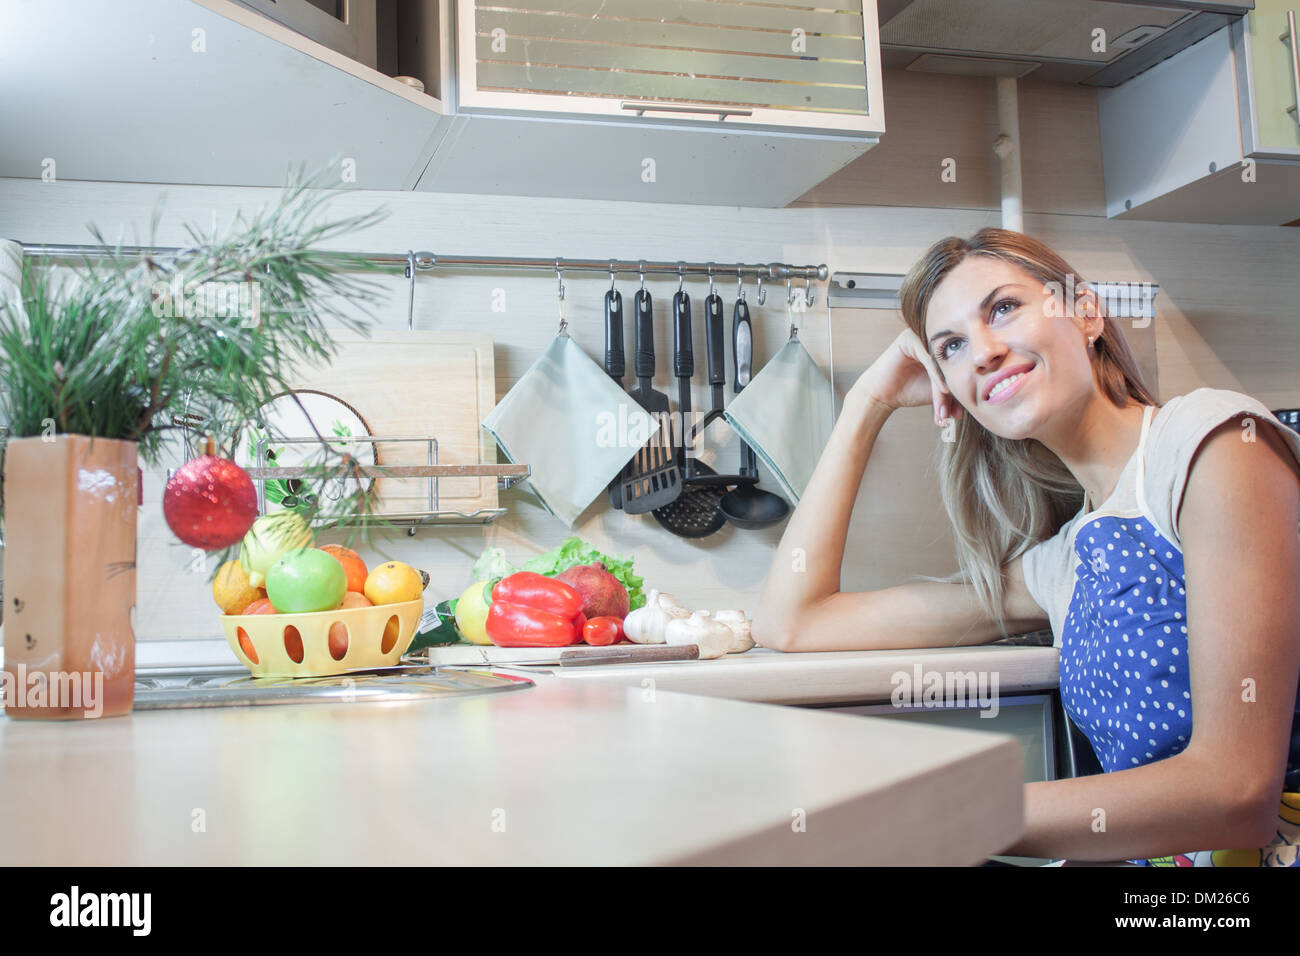 woman cooking kitchen happy 'healthy food' smiling thinking Stock Photo